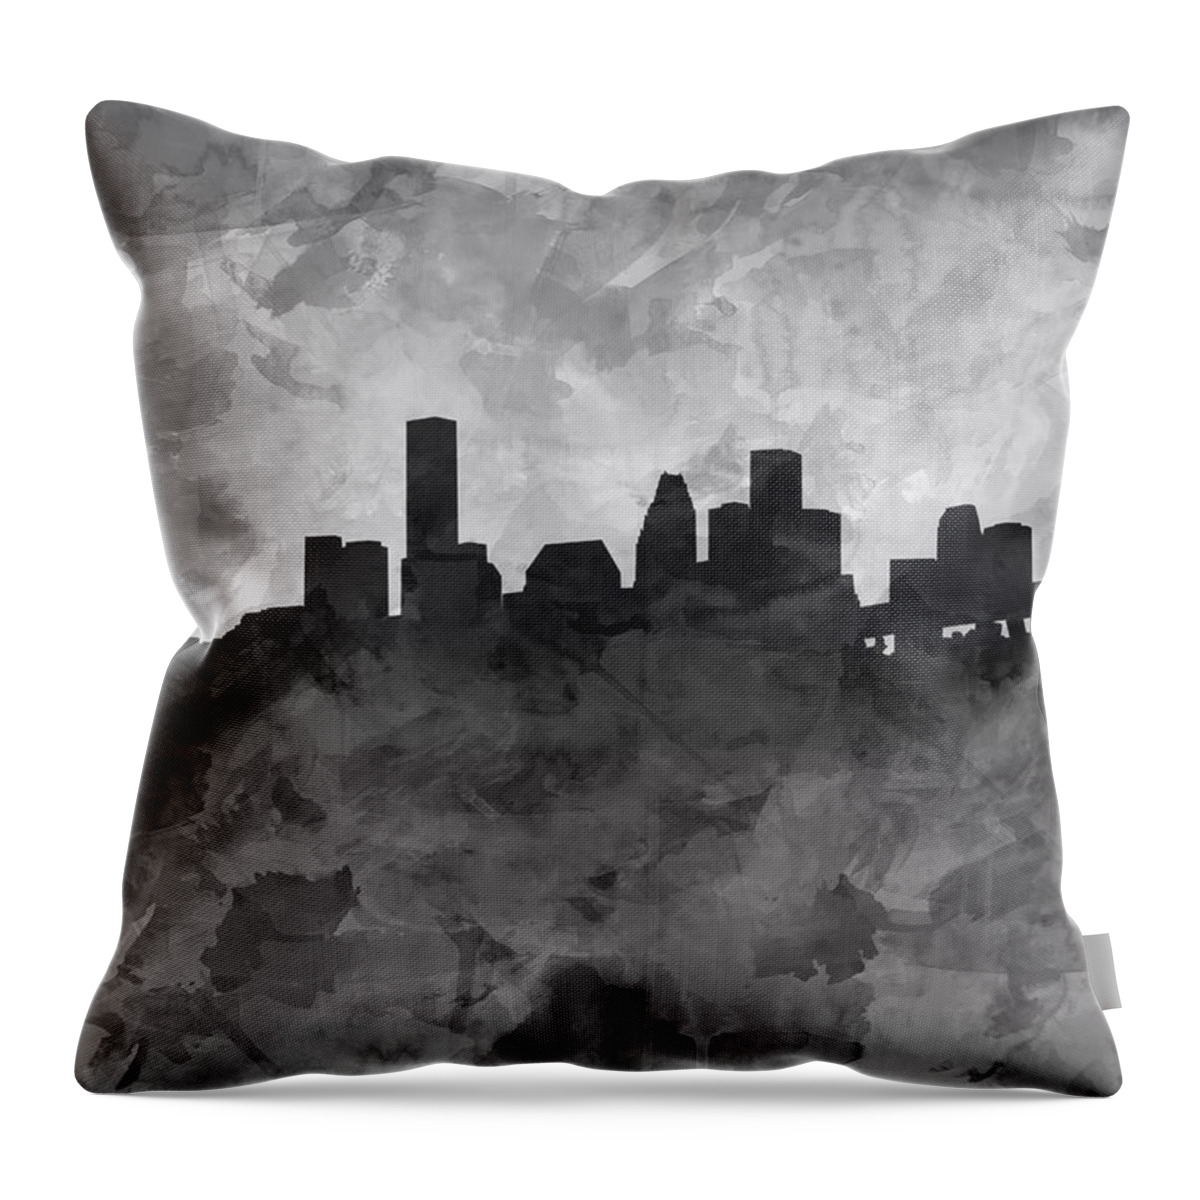 Houston Throw Pillow featuring the painting Houston Skyline Grunge by Bekim M